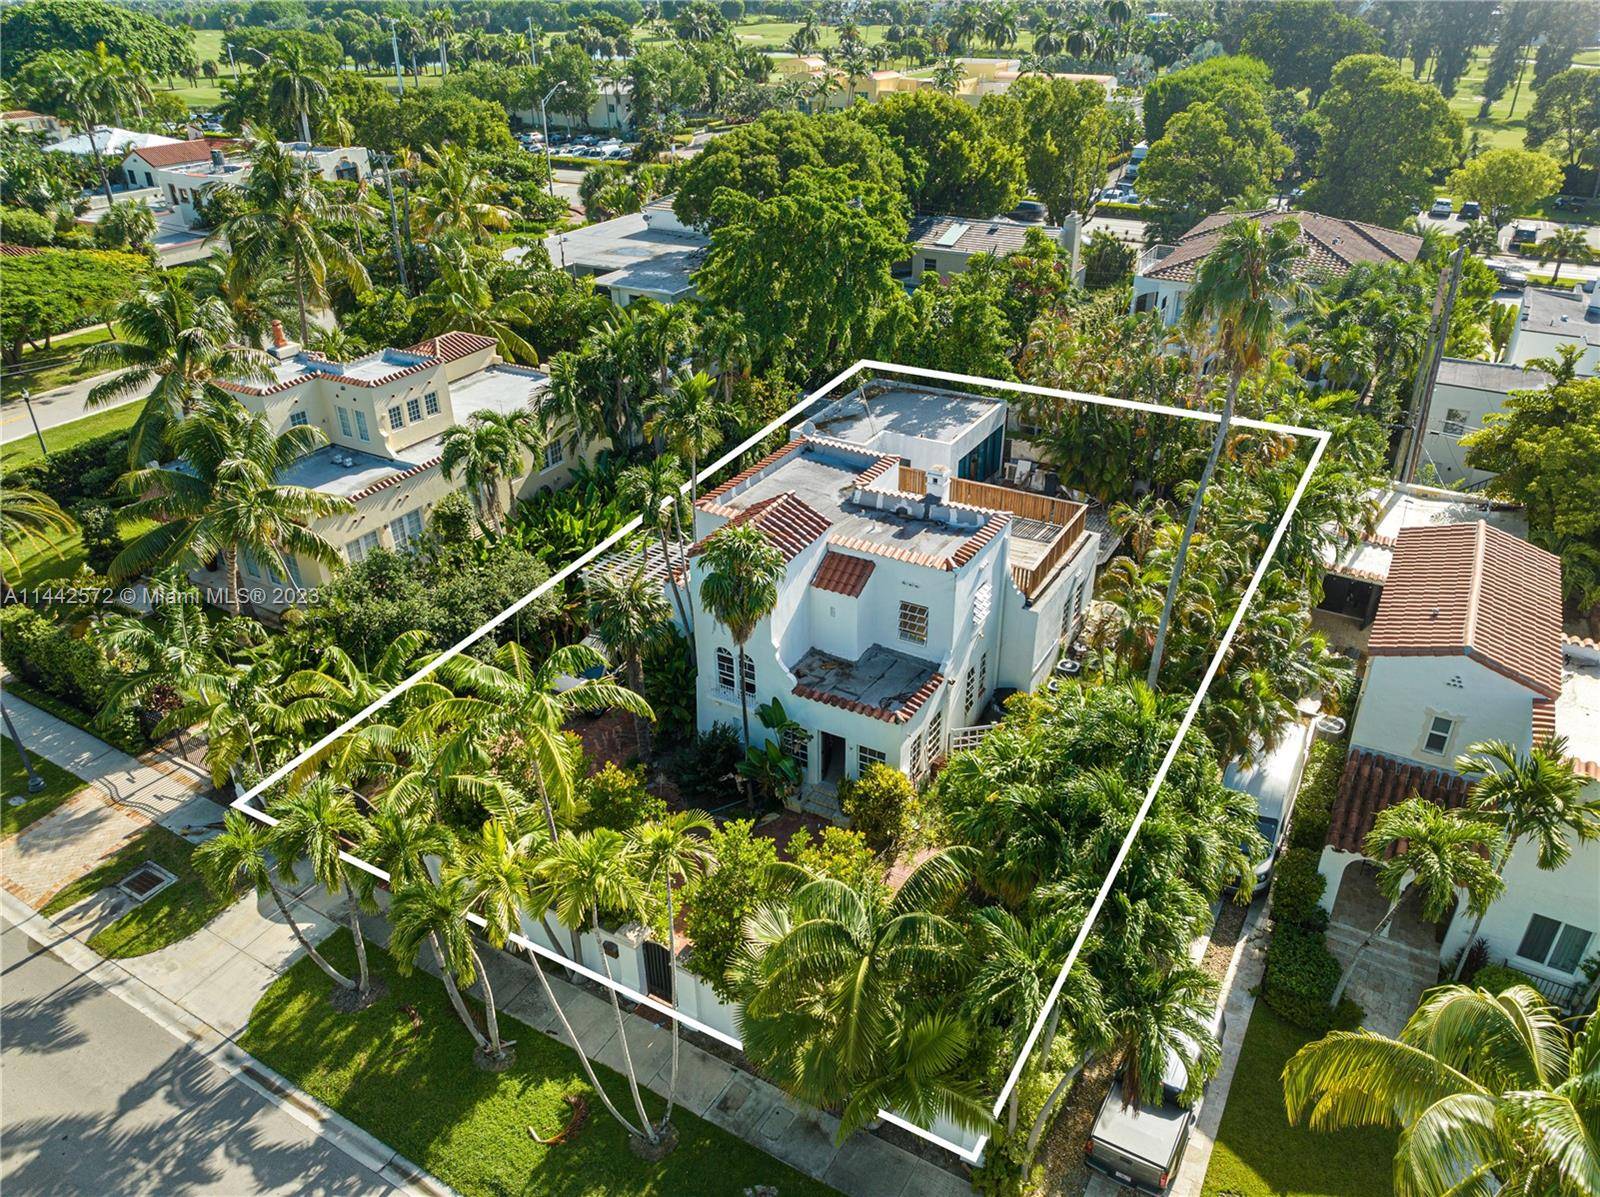 This charming Mediterranean home makes an excellent opportunity to renovate or build your dream home on North Bay Road and live amongst the most esteemed homes in Miami Beach.